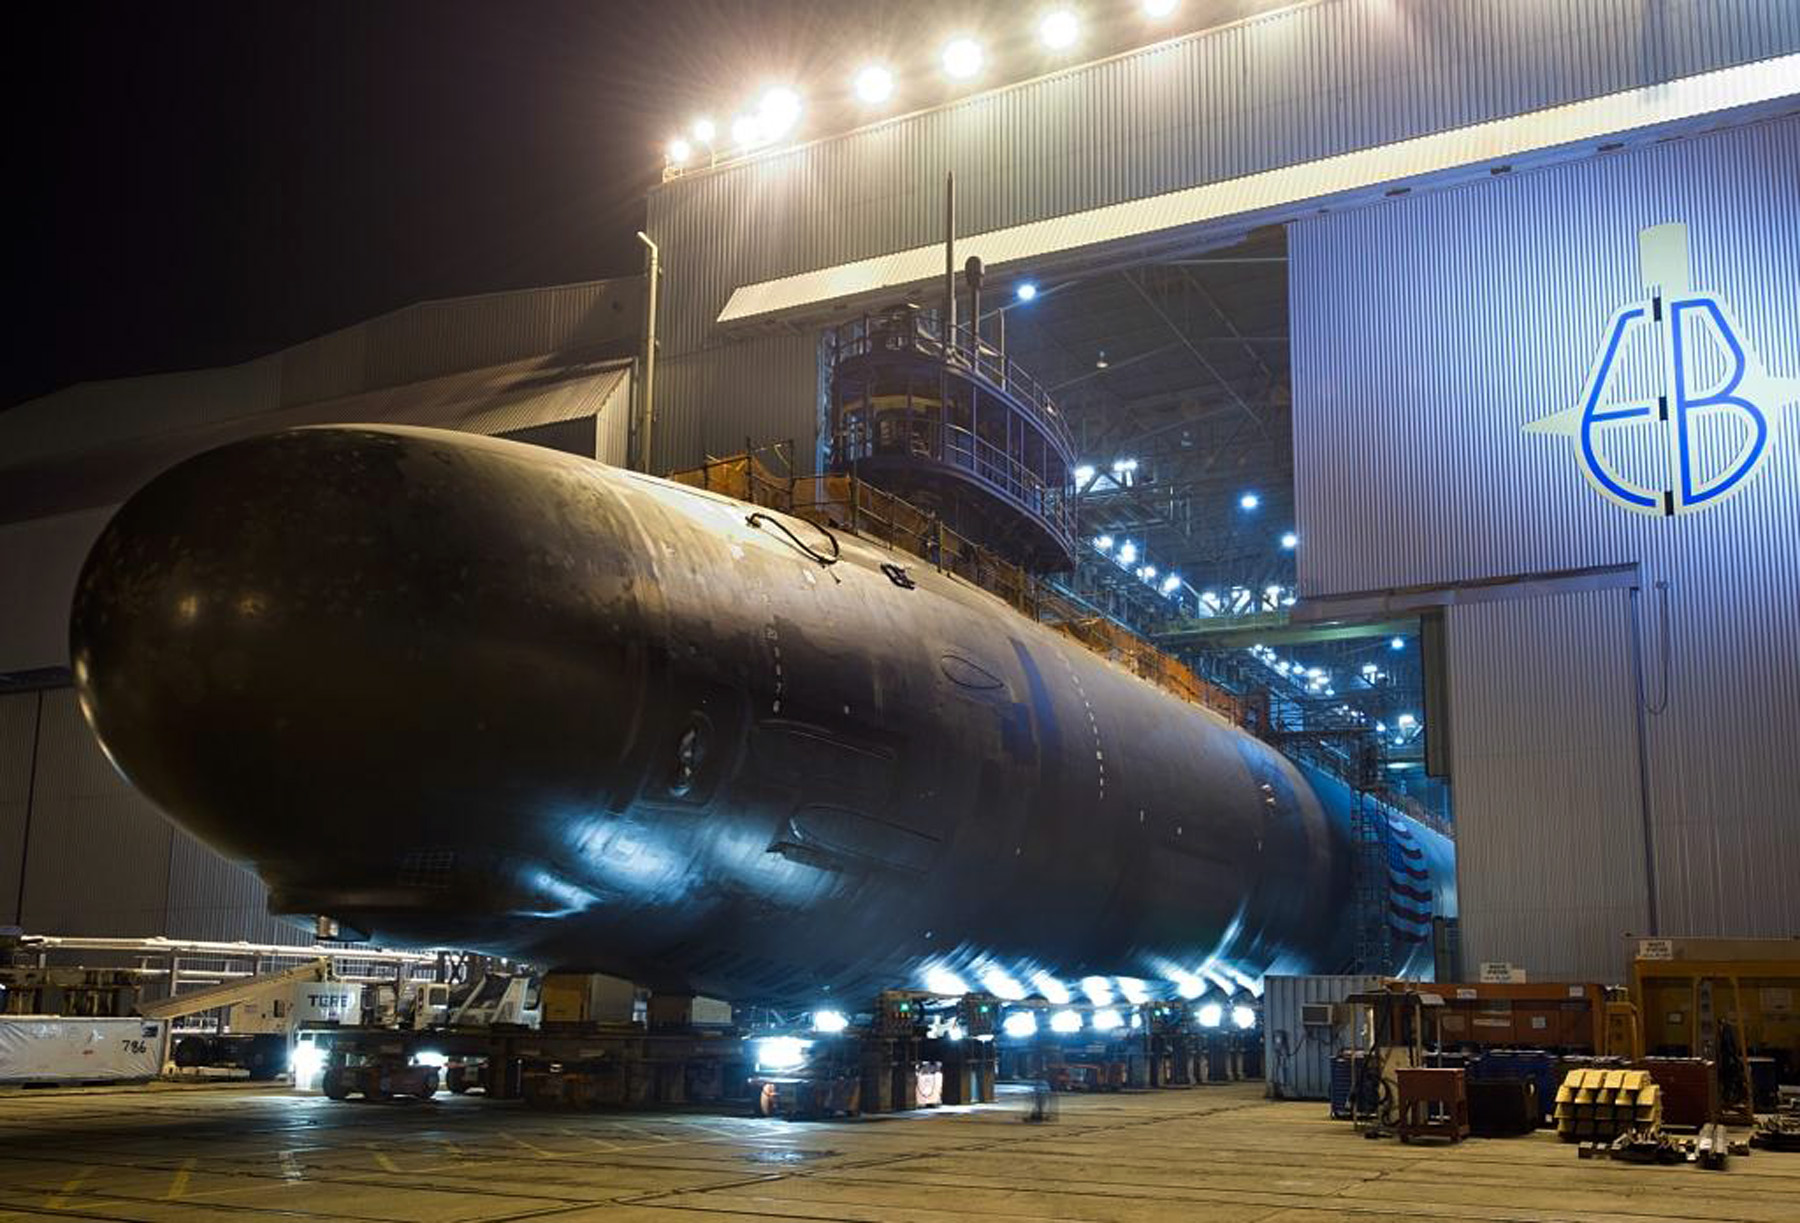 The Virginia-class attack submarine North Dakota (SSN-784) is rolled out of an indoor shipyard facility at General Dynamics Electric Boat in Groton, Conn., in Sept. 2013. US Navy photo.